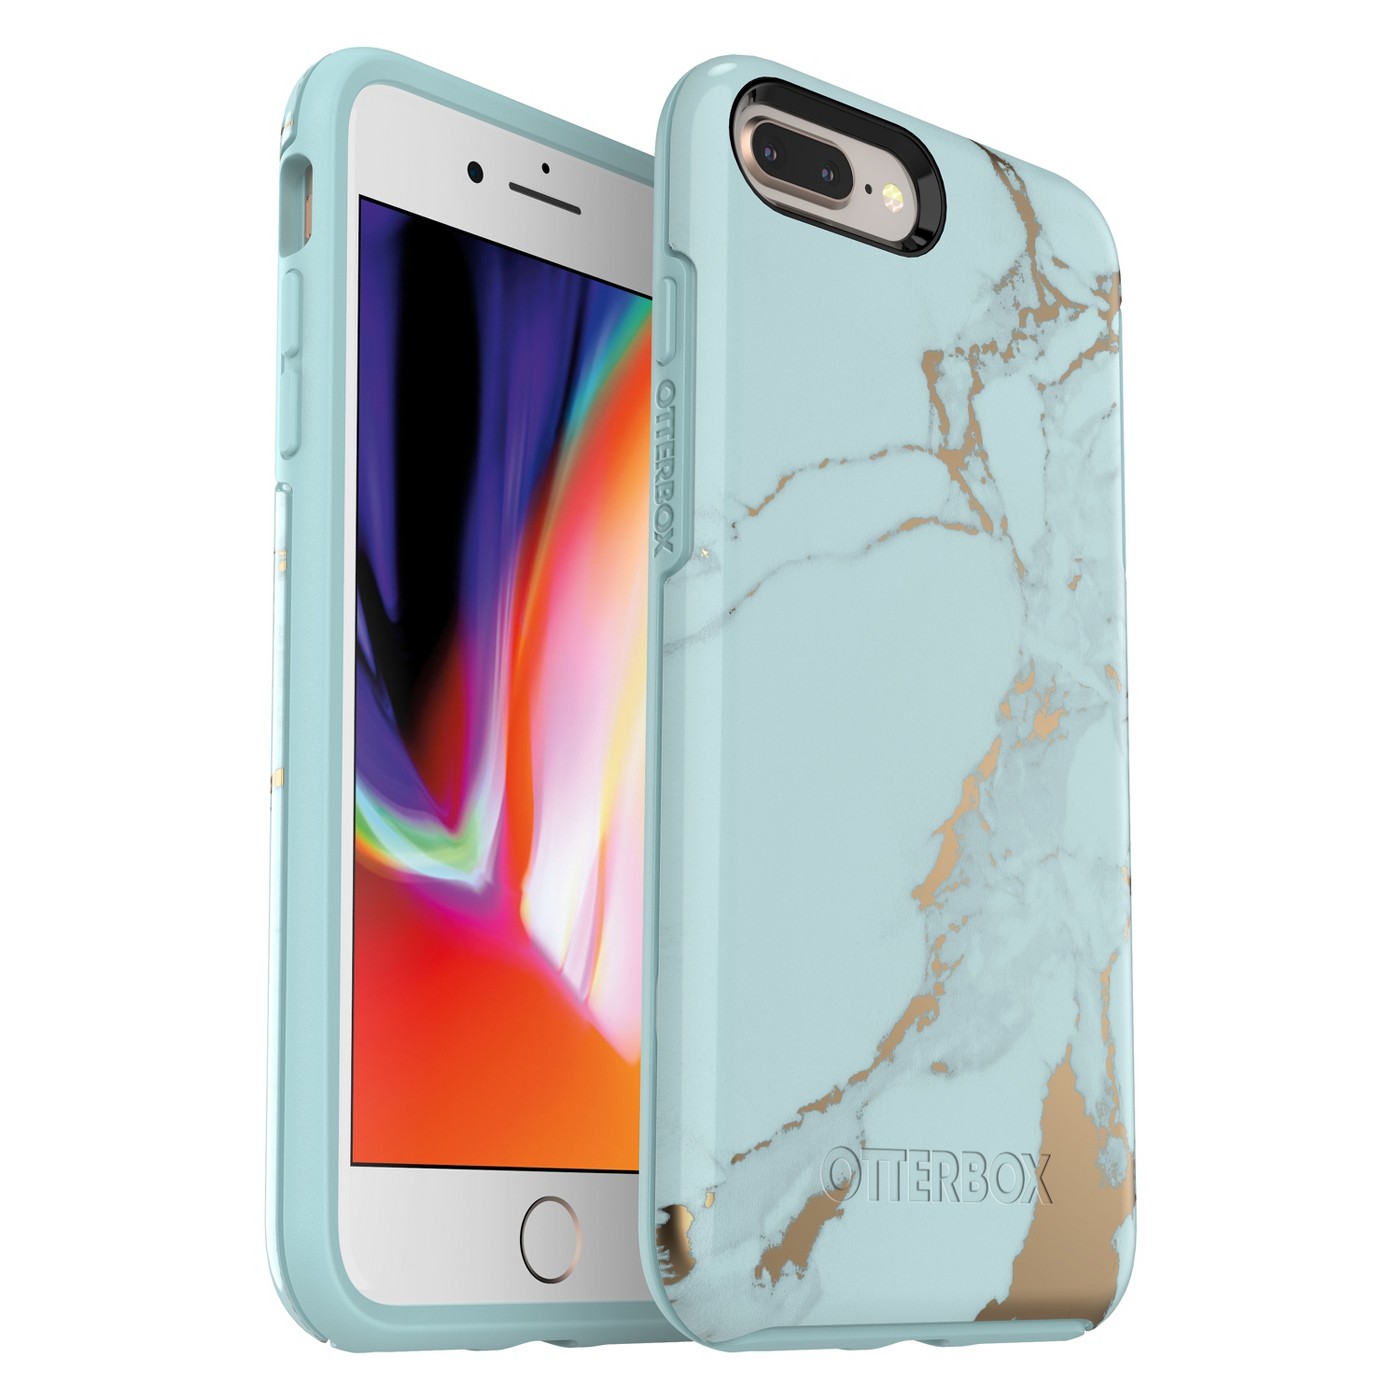 OtterBox Apple iPhone 8 Plus/7 Plus Symmetry Case - Teal Marble - image 1 of 4